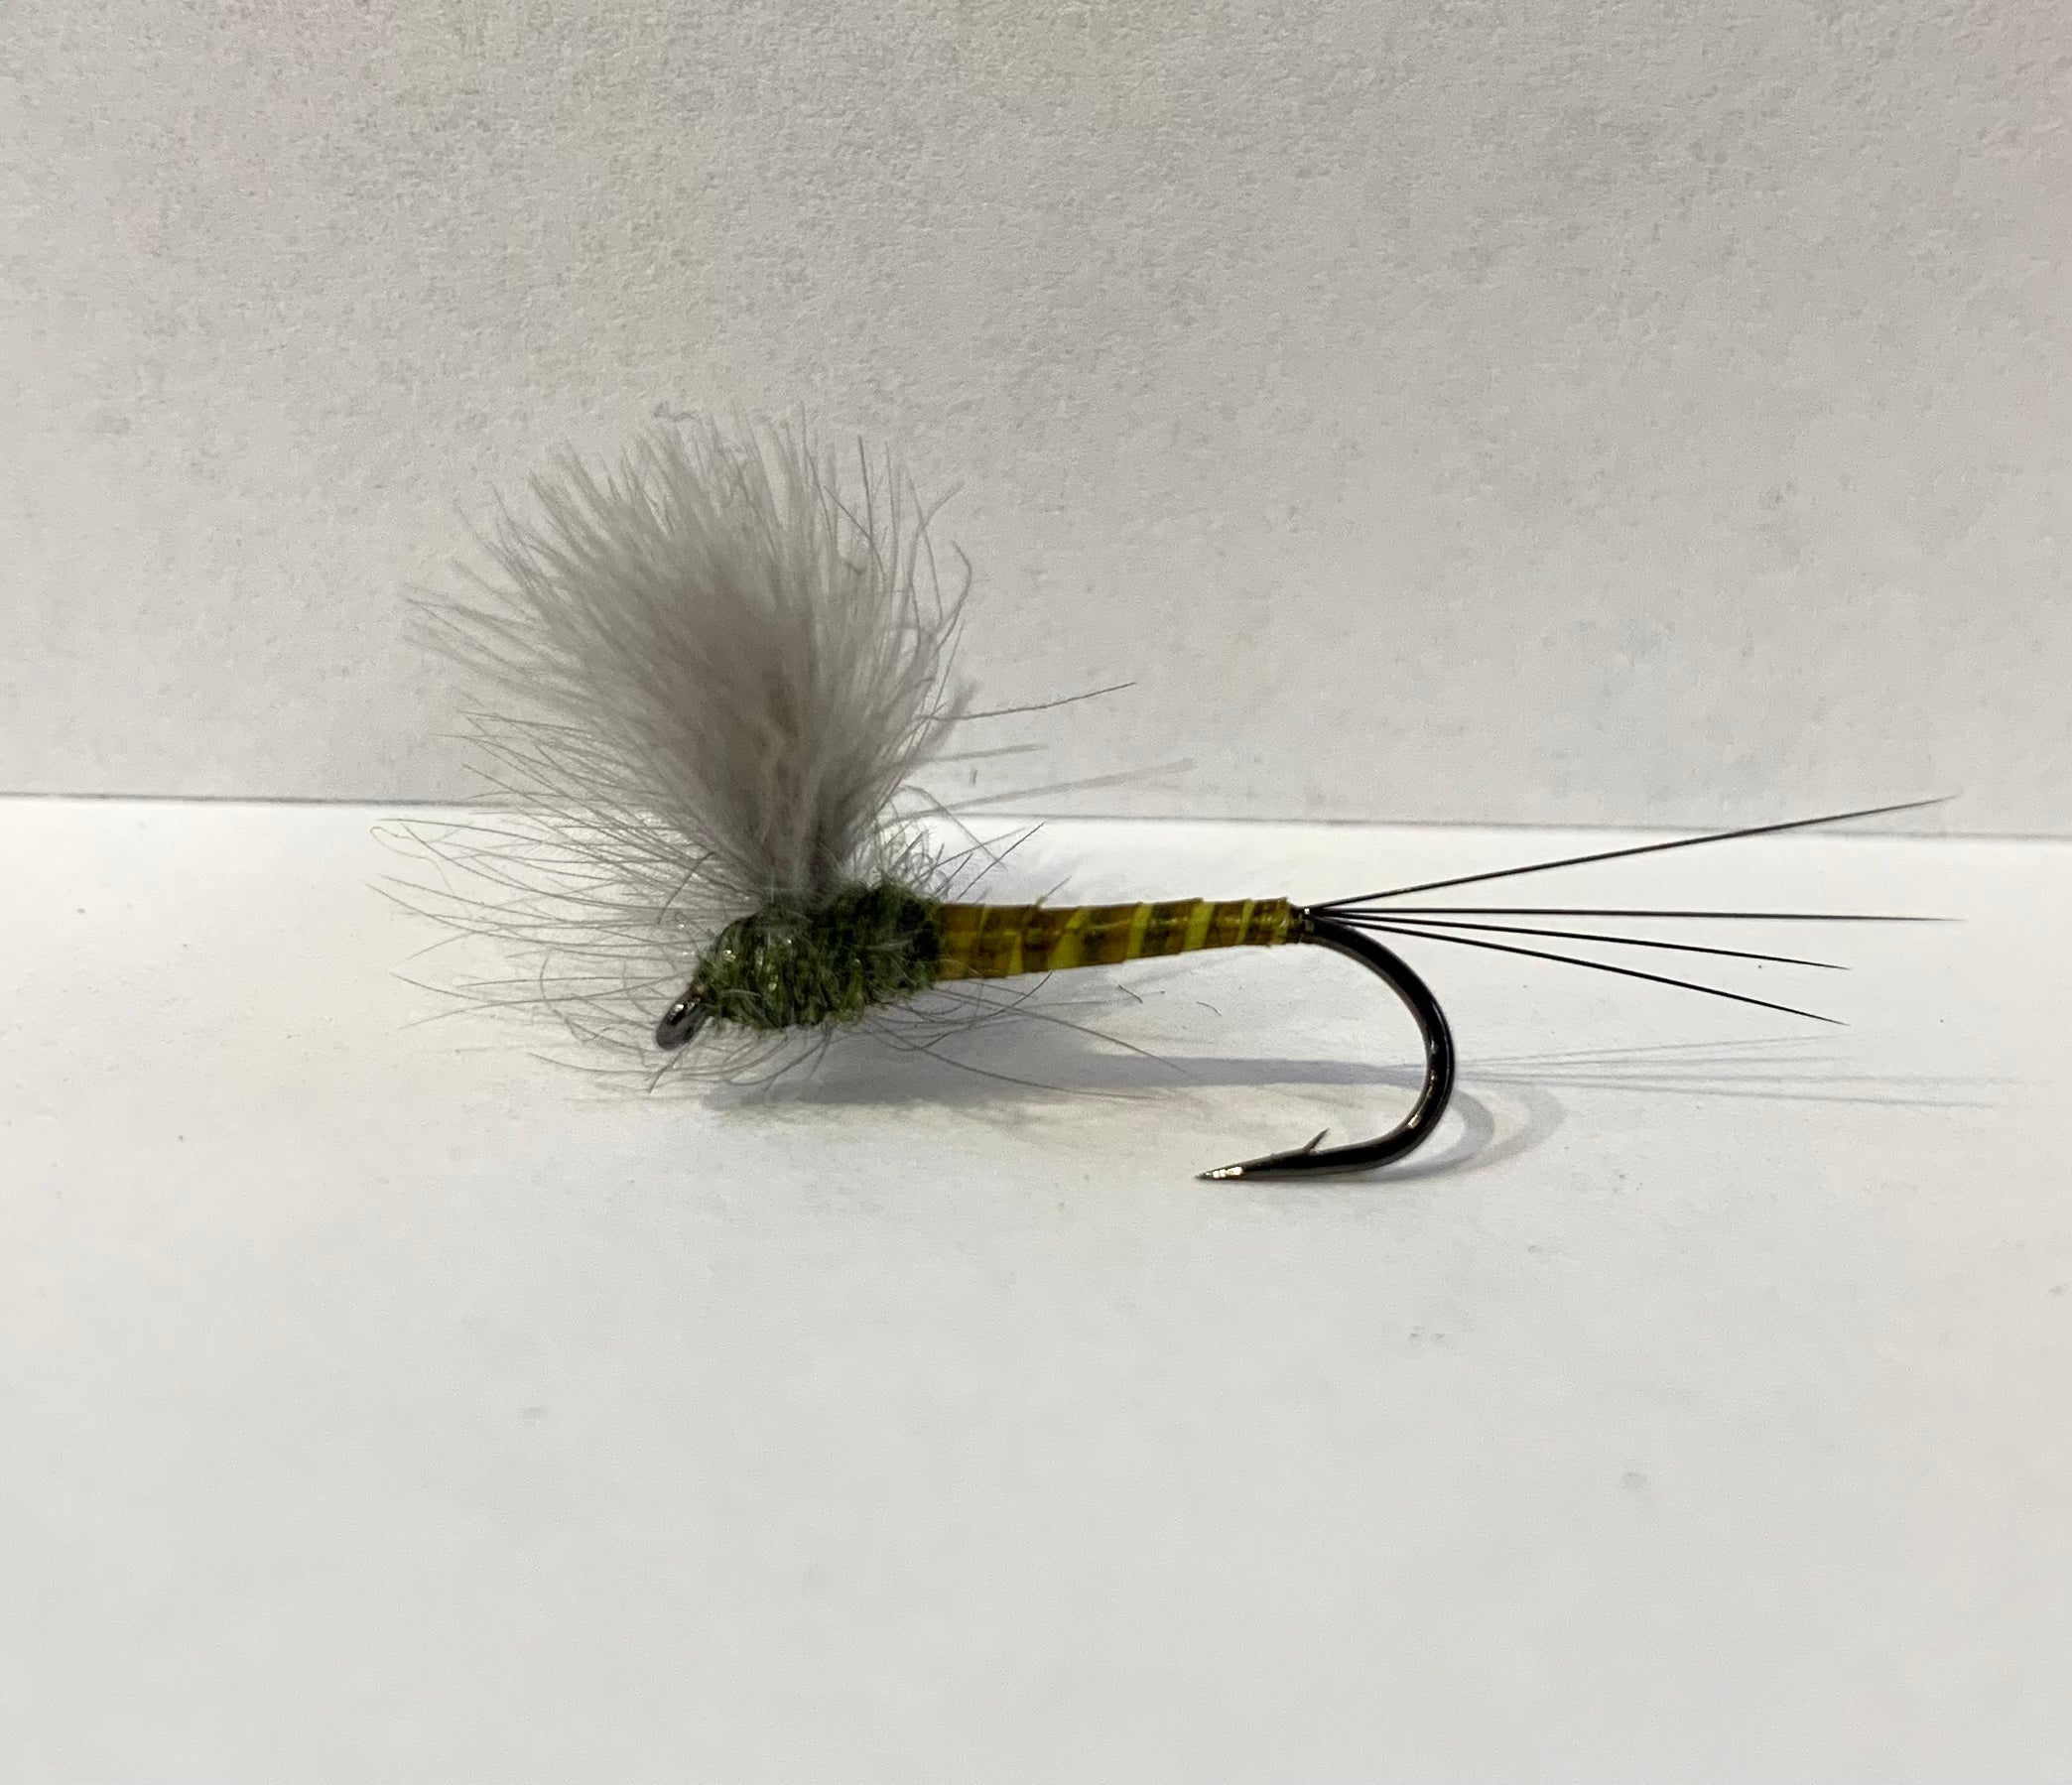 Quill Body CDC Comparadun - Green Drake – Out Fly Fishing